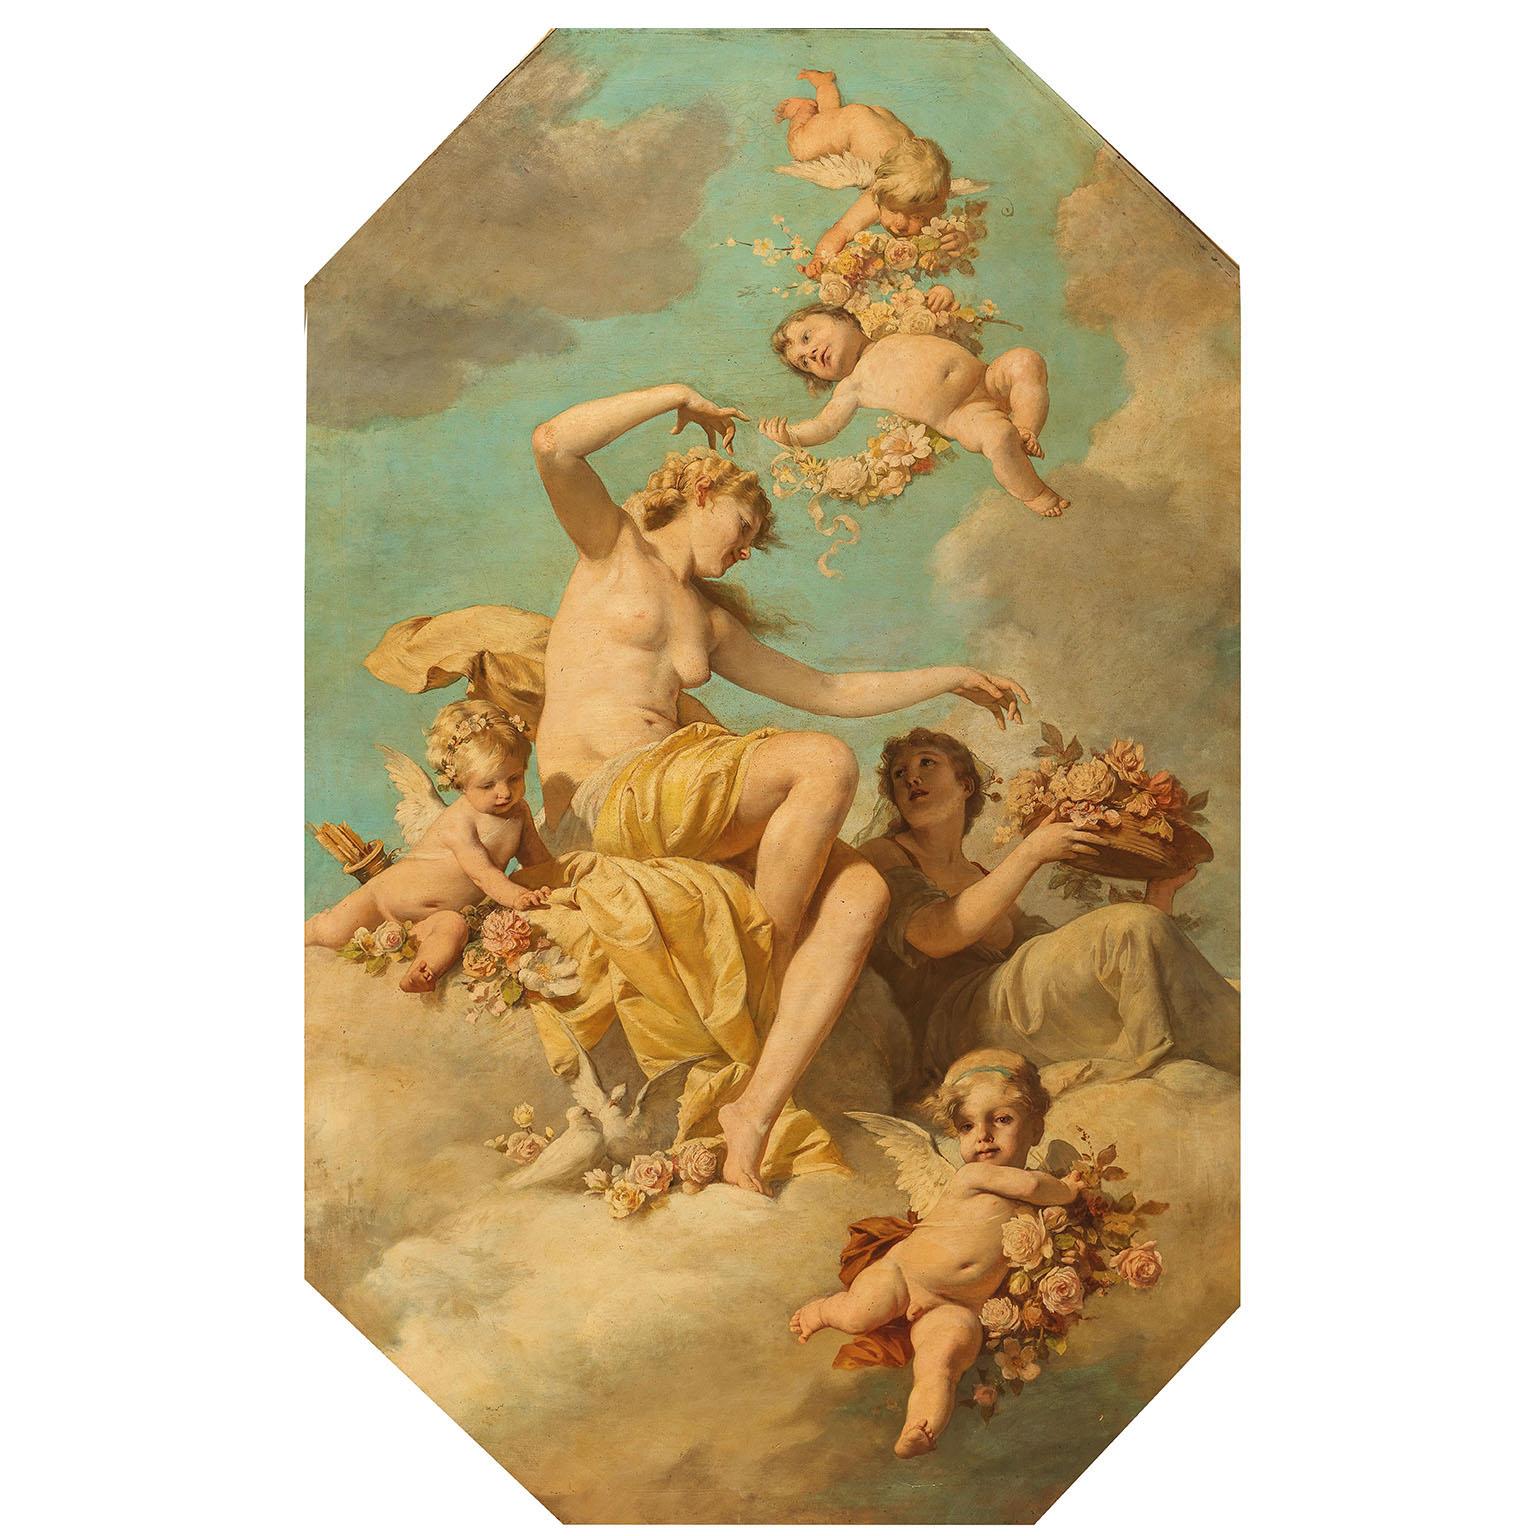 A very fine and large 19th century Louis XV style Whimsical Neoclassical Revival style Oil on Canvas 